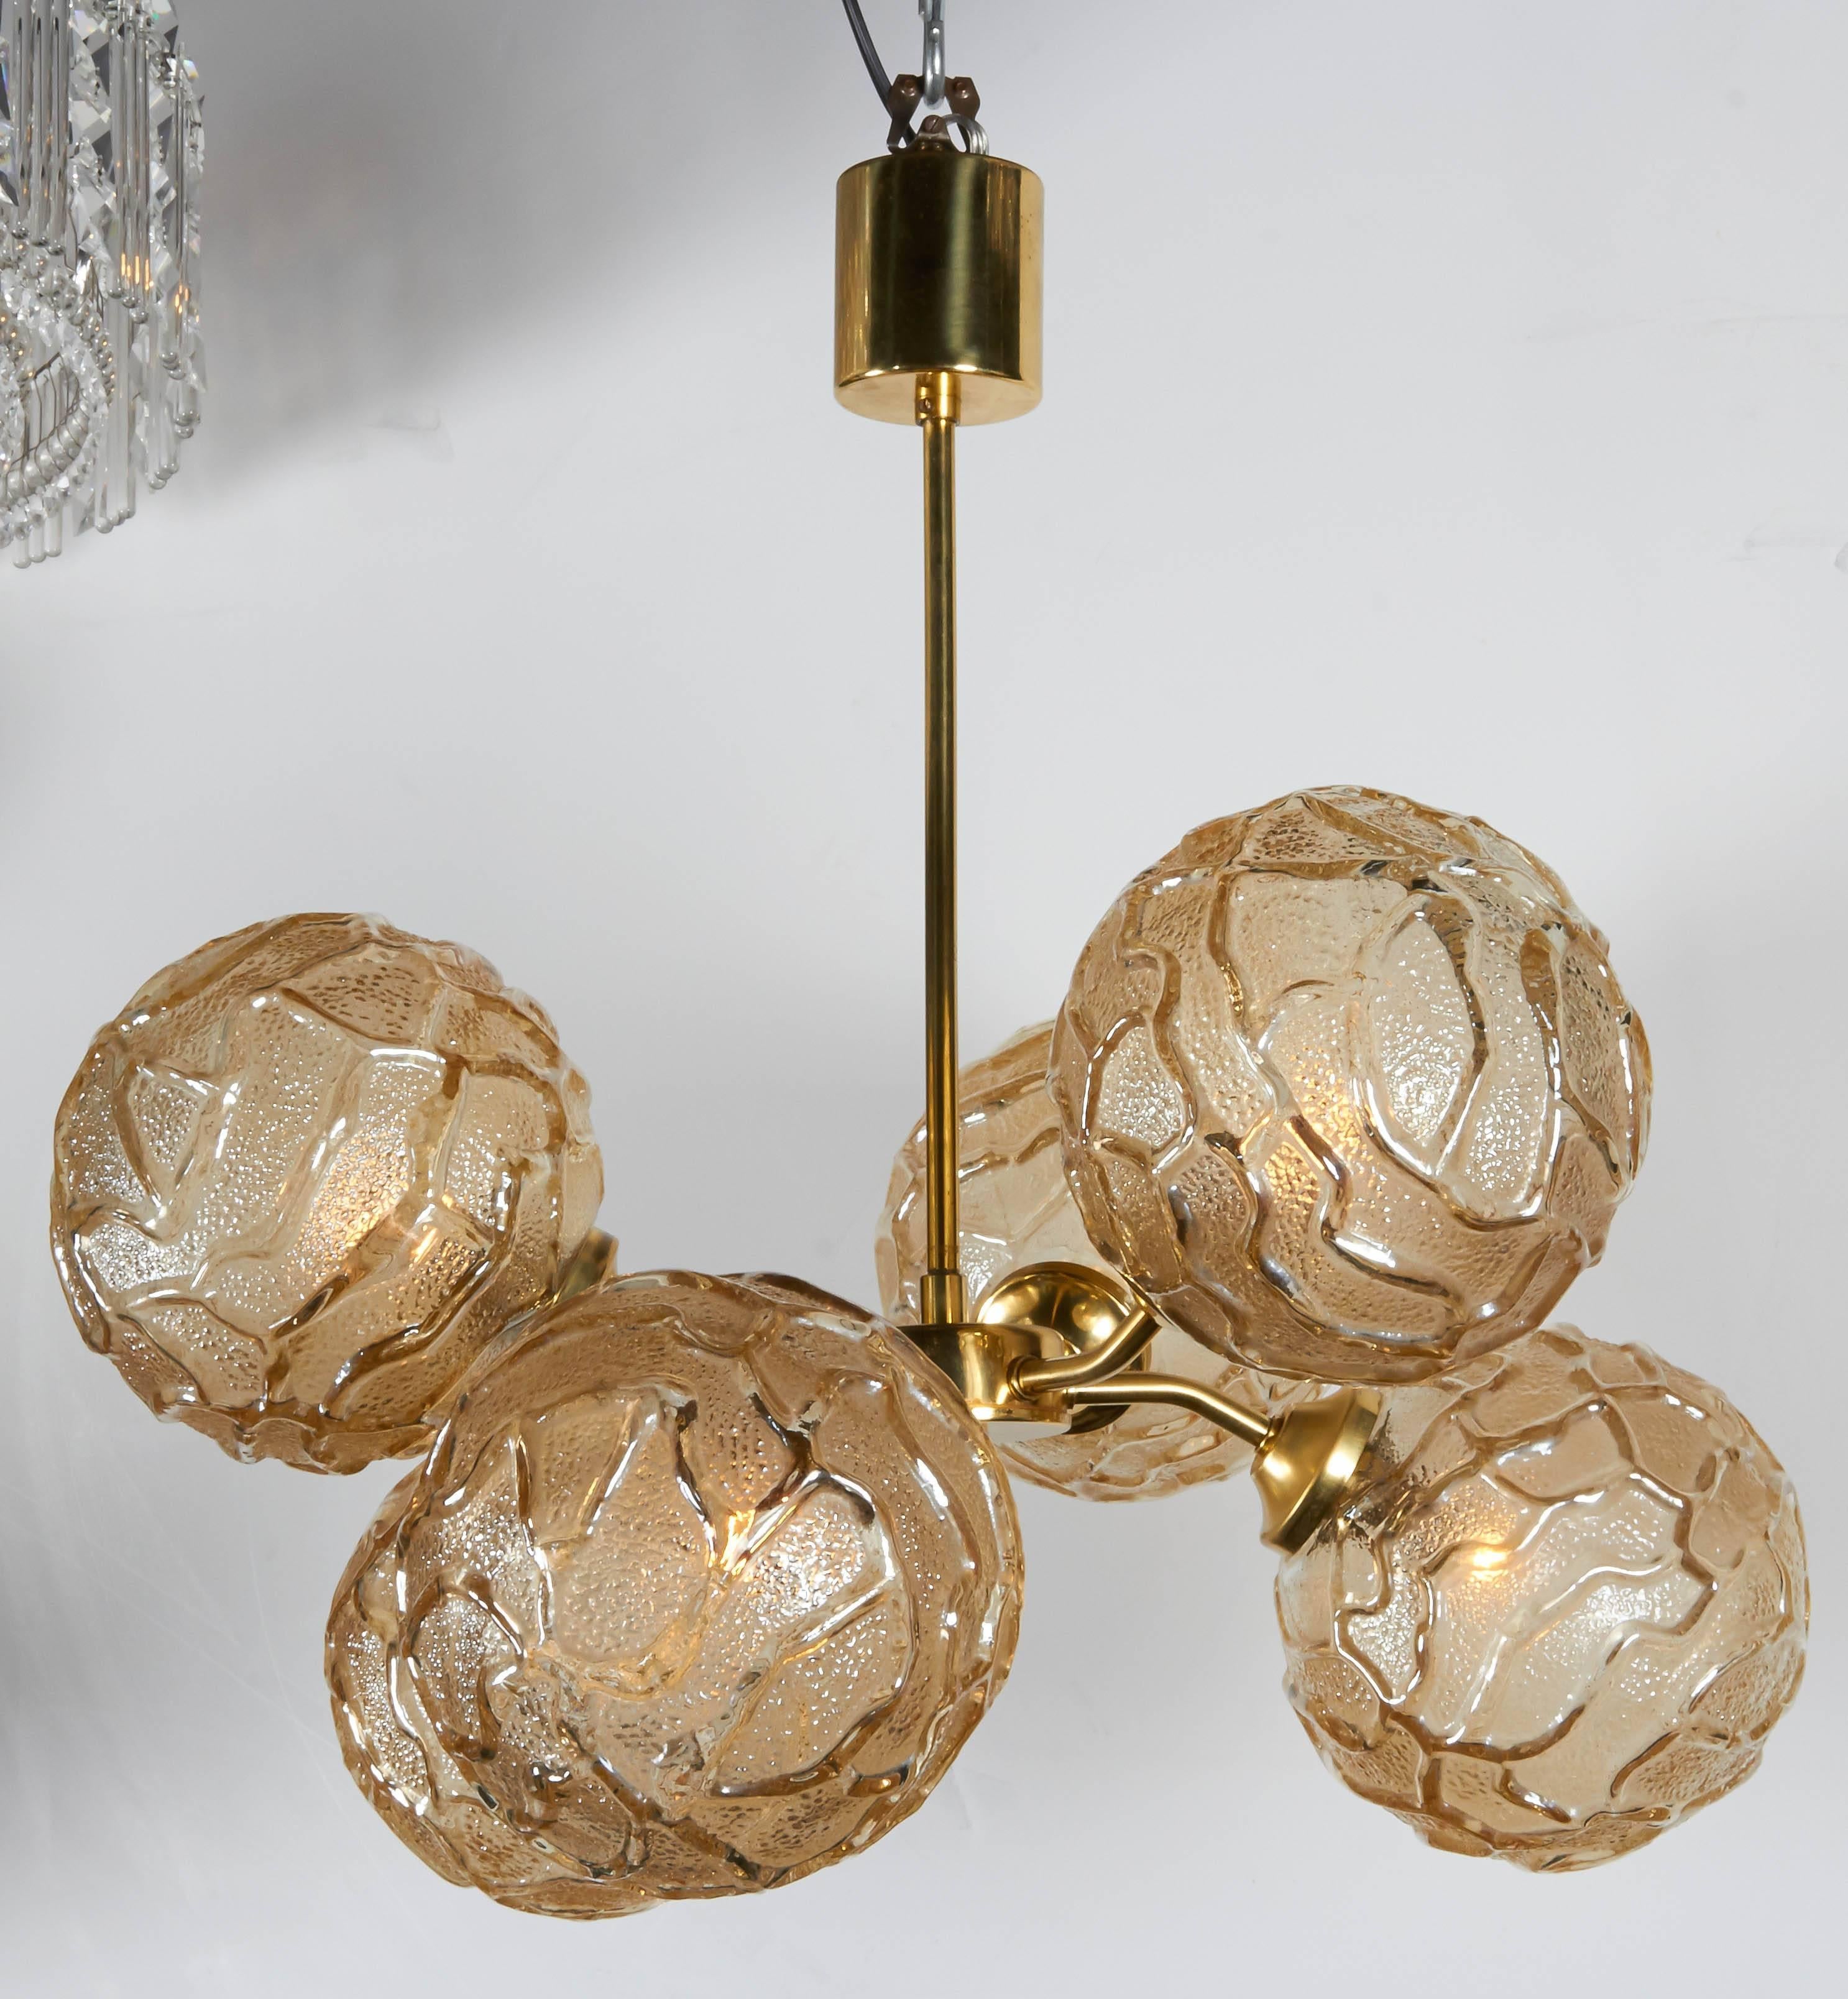 Mid-Century Modern French, 1950s Sputnik Chandelier with Geometric Glass Globes in Champagne